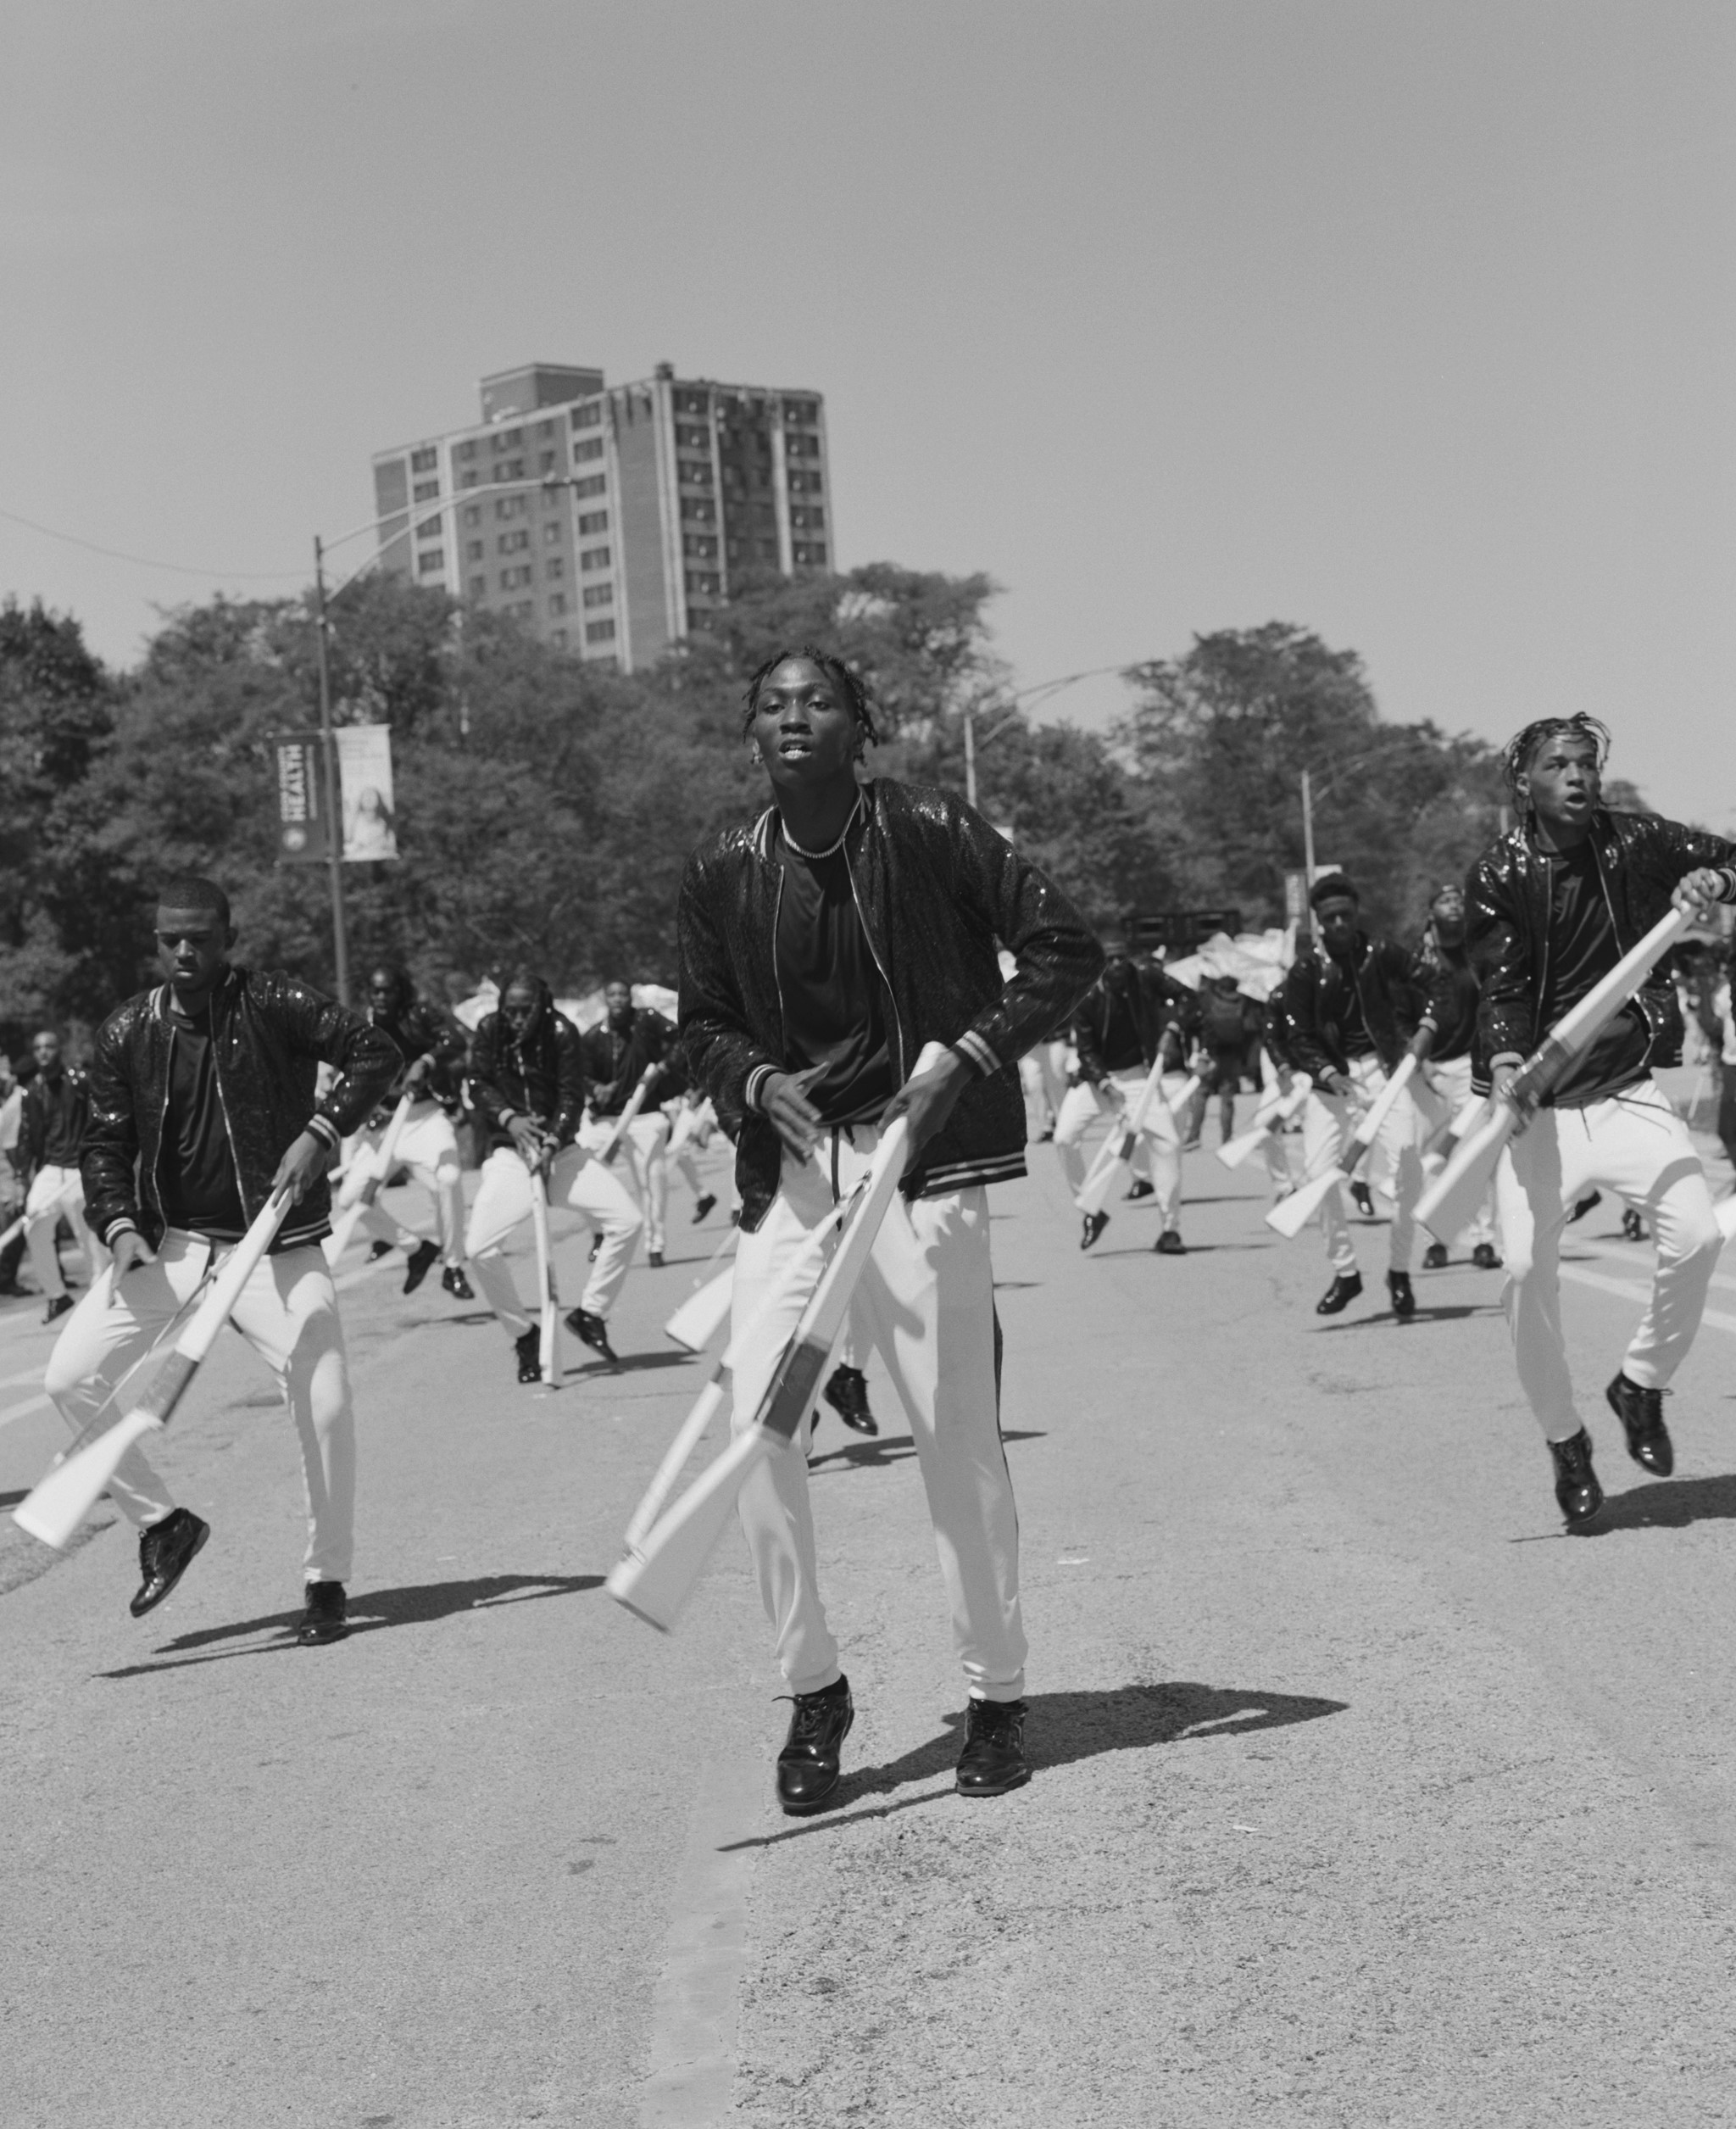 South Shore Drill Team performers with rifles in hand, shot in black and white.